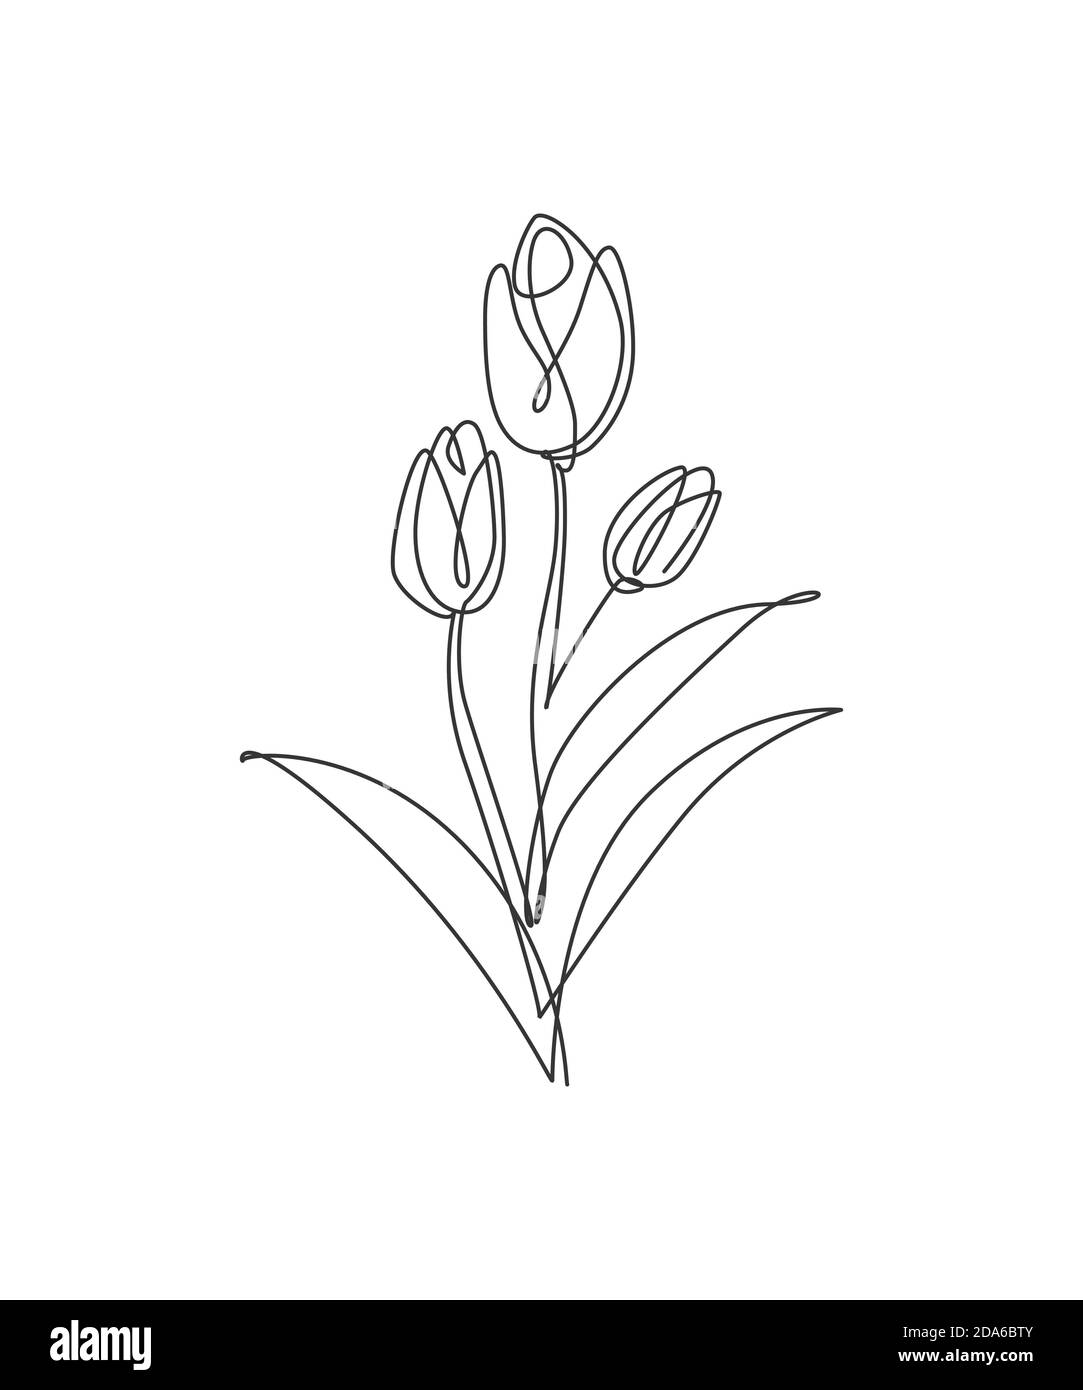 One single line drawing beauty tulip flower vector illustration ...